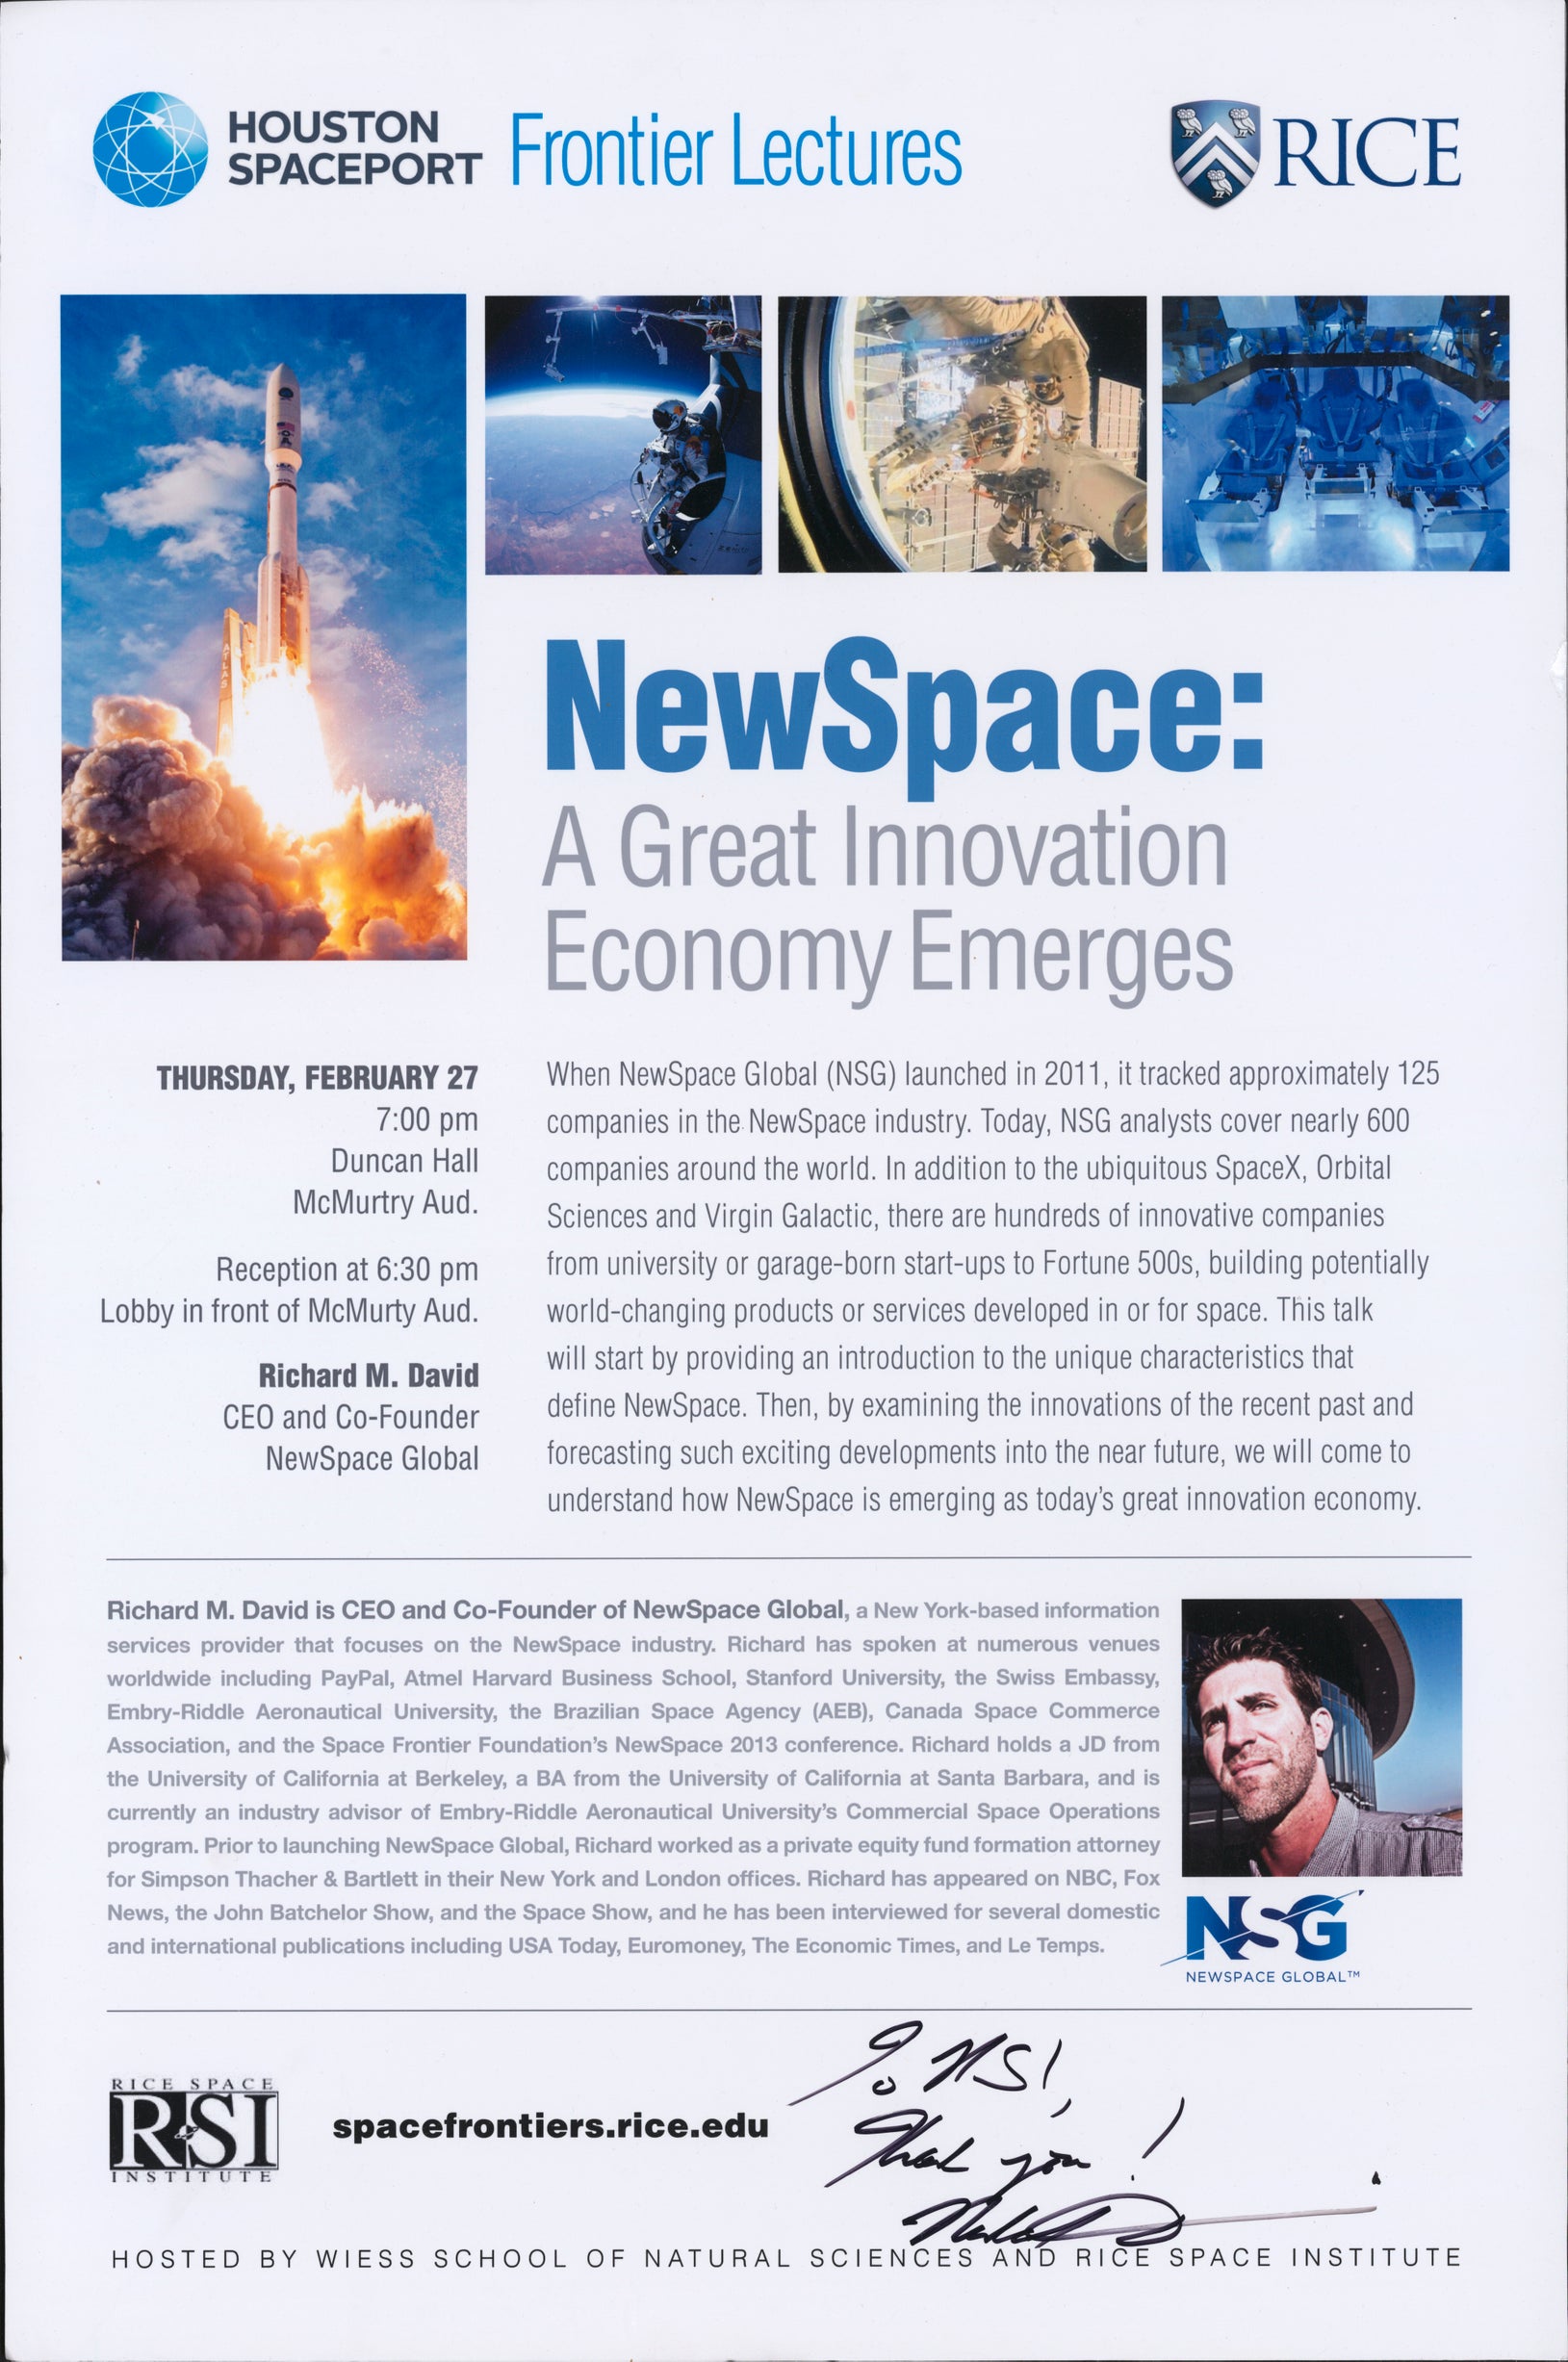 When NewSpace Global (NSG) launched in 2011, it tracked approximately 125 companies in the NewSpace industry. Today, NSG analysts cover nearly 600 companies around the world. In addition to the ubiquitous SpaceX, Orbital Sciences, and Virgin Galactic, there are hundreds of innovative companies from university or garage-born start-ups to Fortune 500s, building potentially world-changing products or services developed in or for space. This talk will start by providing an introduction to the unique characteristics that define NewSpace. Then, by examining the innovations of the recent past and forecasting such exciting developments into the near future, we will come to understand how NewSpace is emerging as today's great innovation economy.